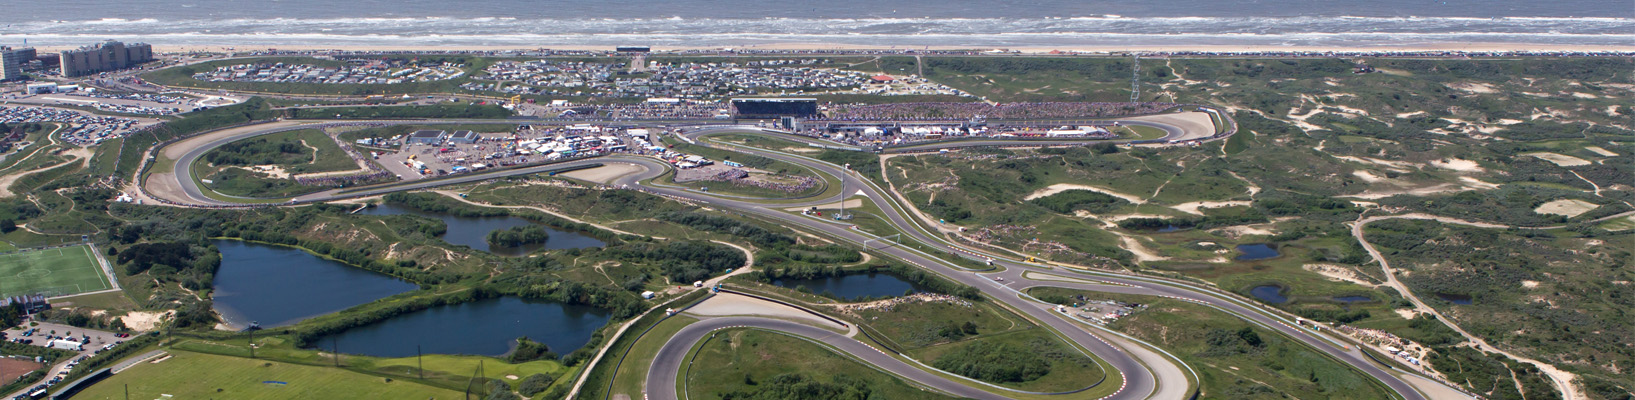 NOW TAKE A CHANCE WITH PORSCHE DESIGN FOR A SPECTACULAR RACE EXPERIENCE ON CIRCUIT ZANDVOORT IN THE NETHERLANDS